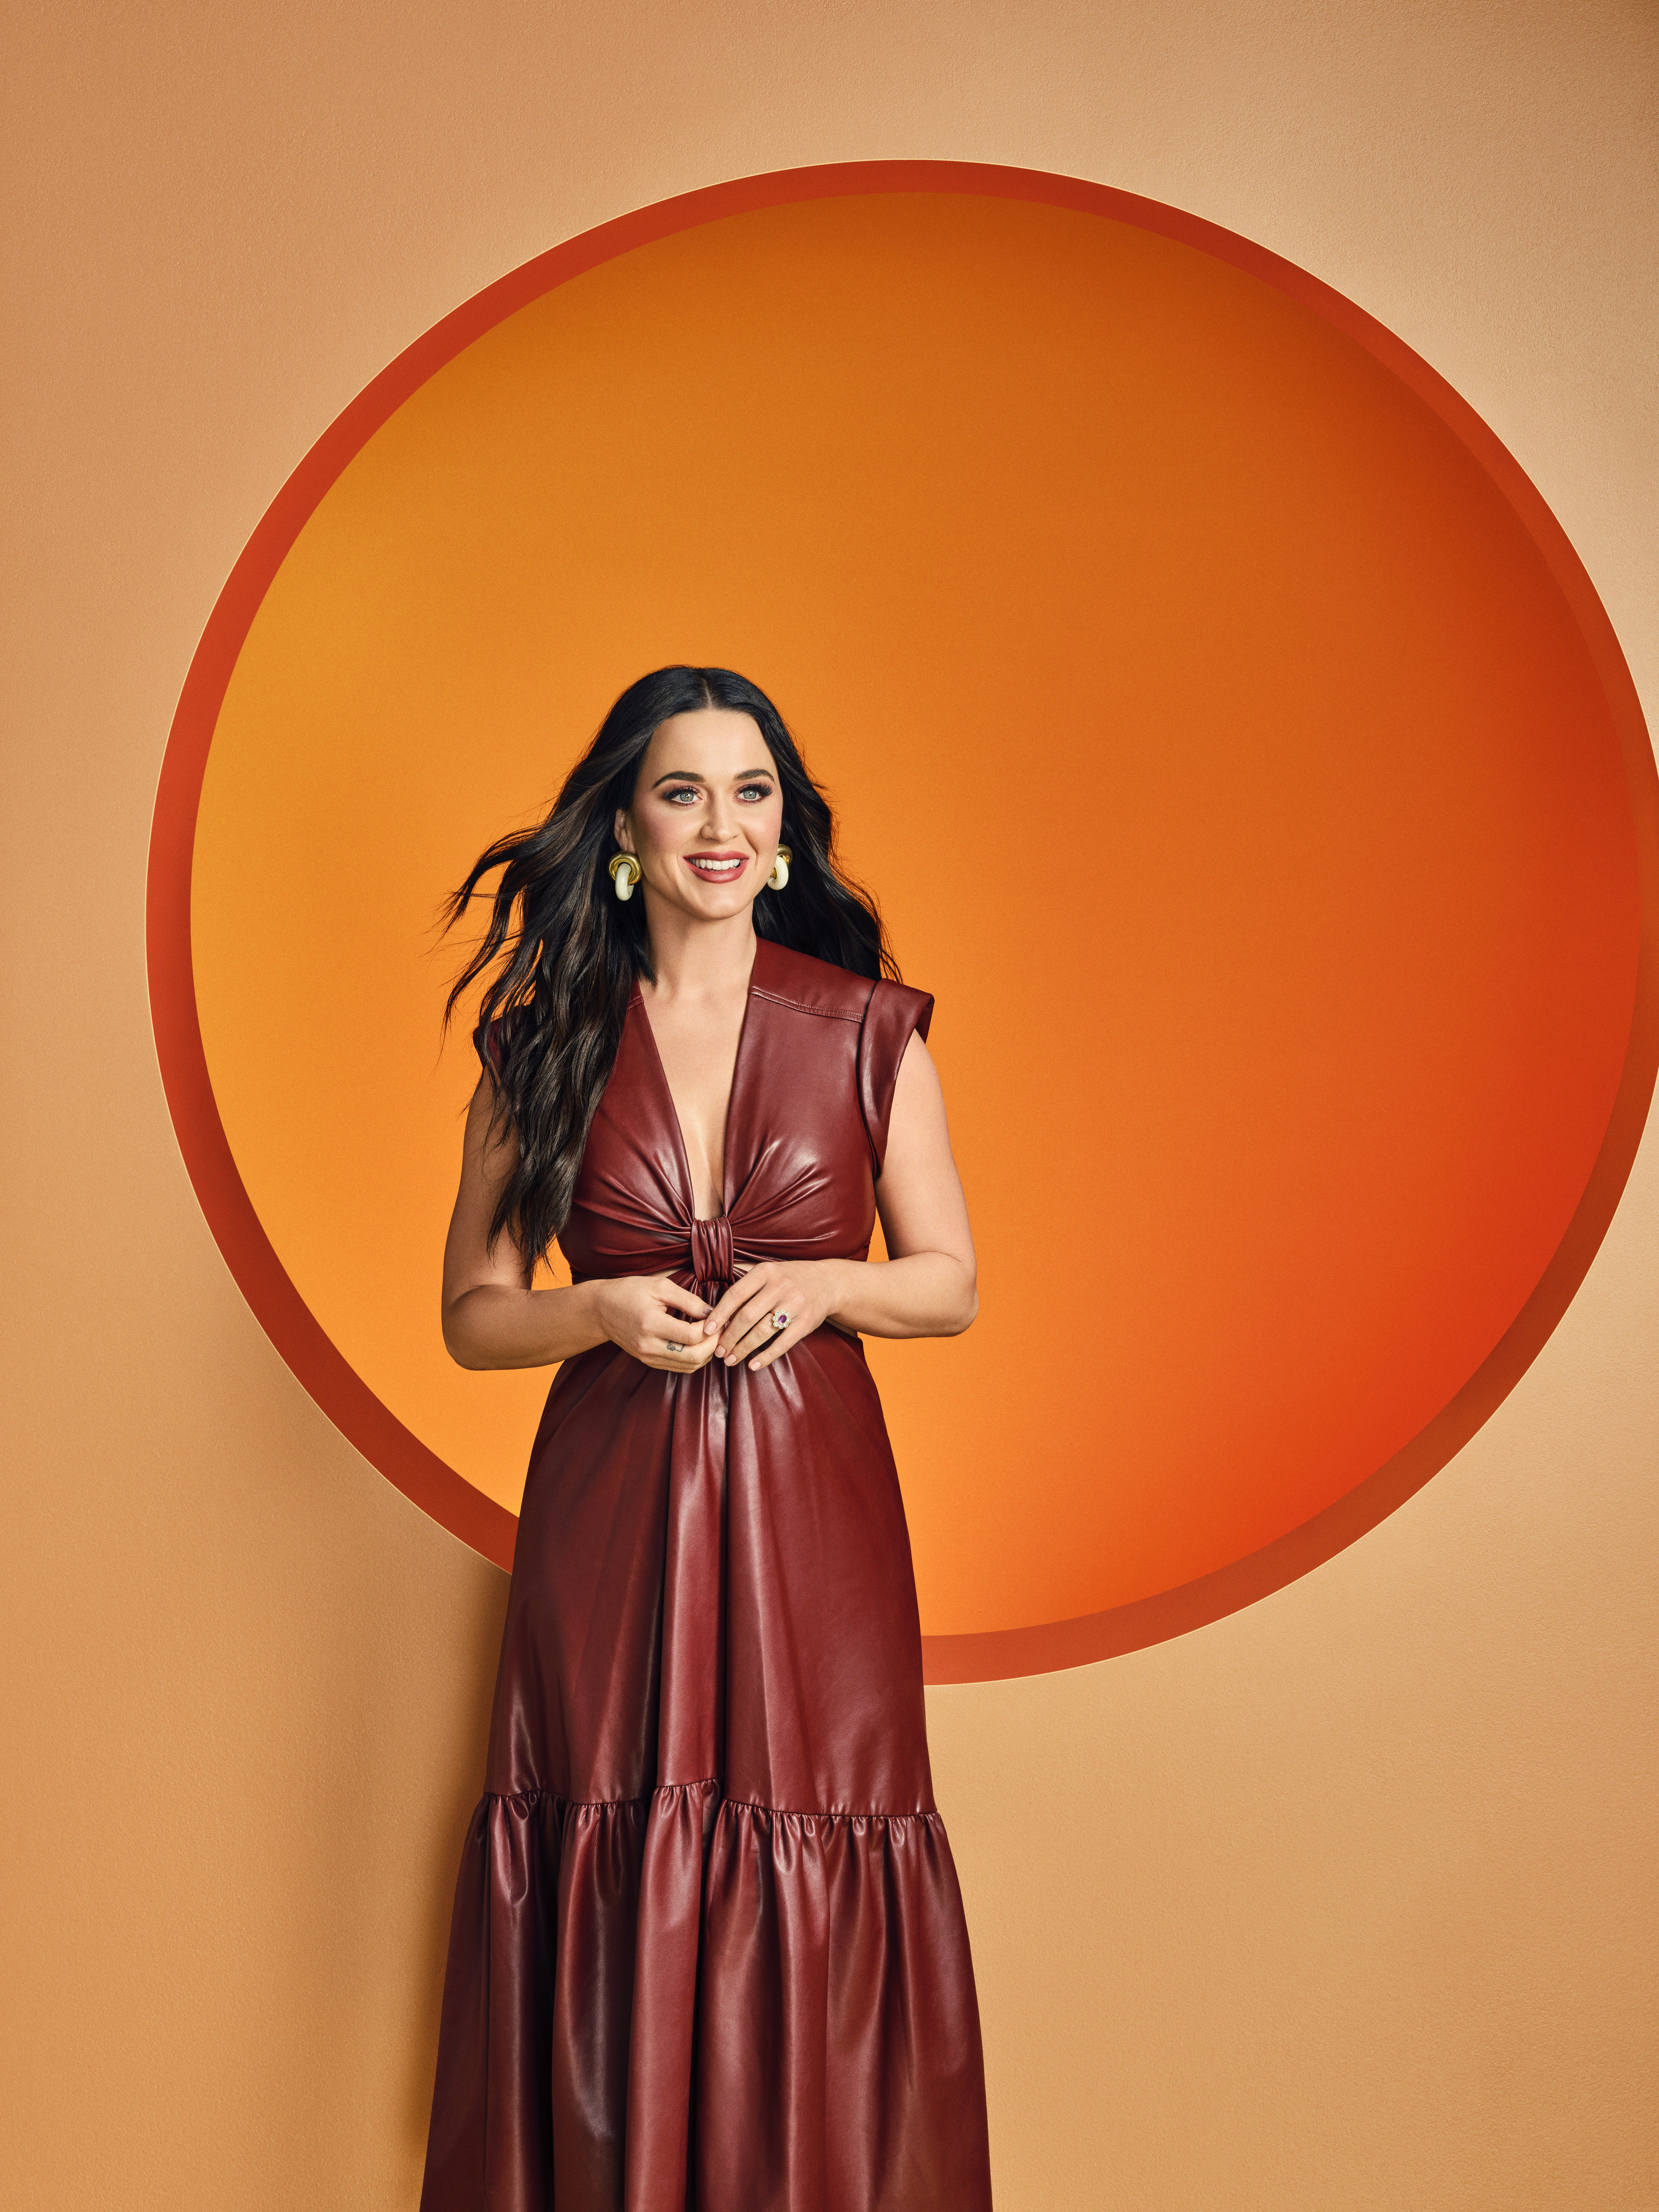 Katy poses in front of an orange circle